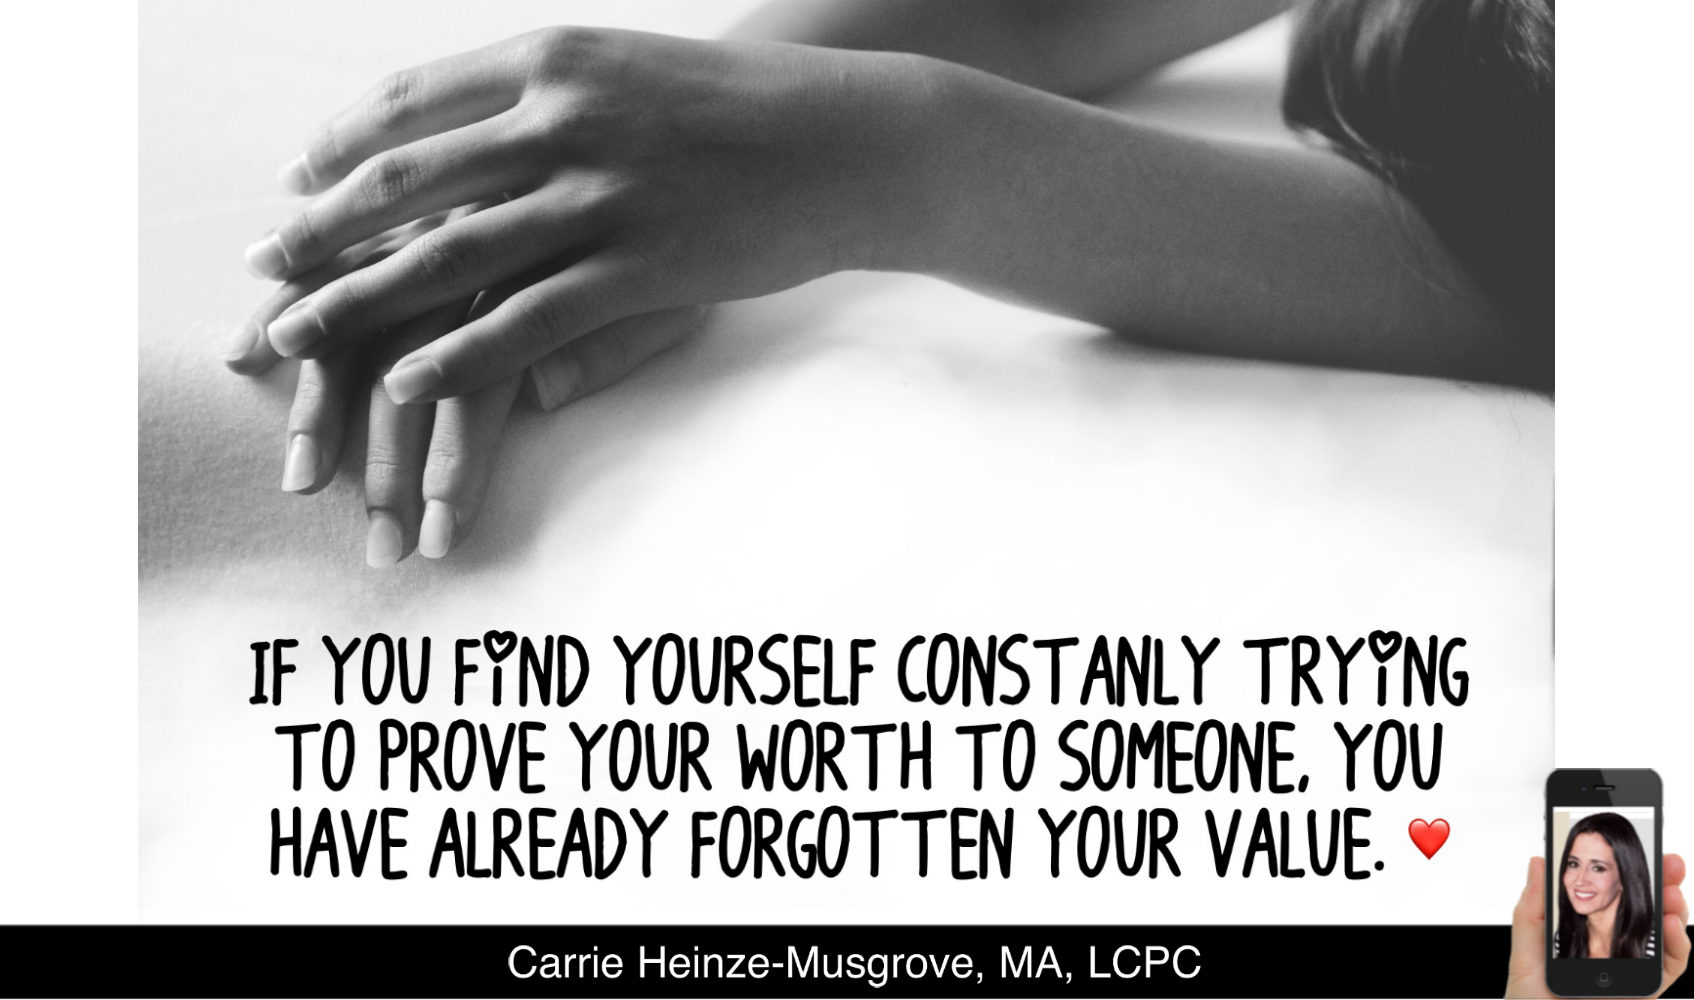 Still Trying to Prove Your Worth? Here’s why you shouldn’t.